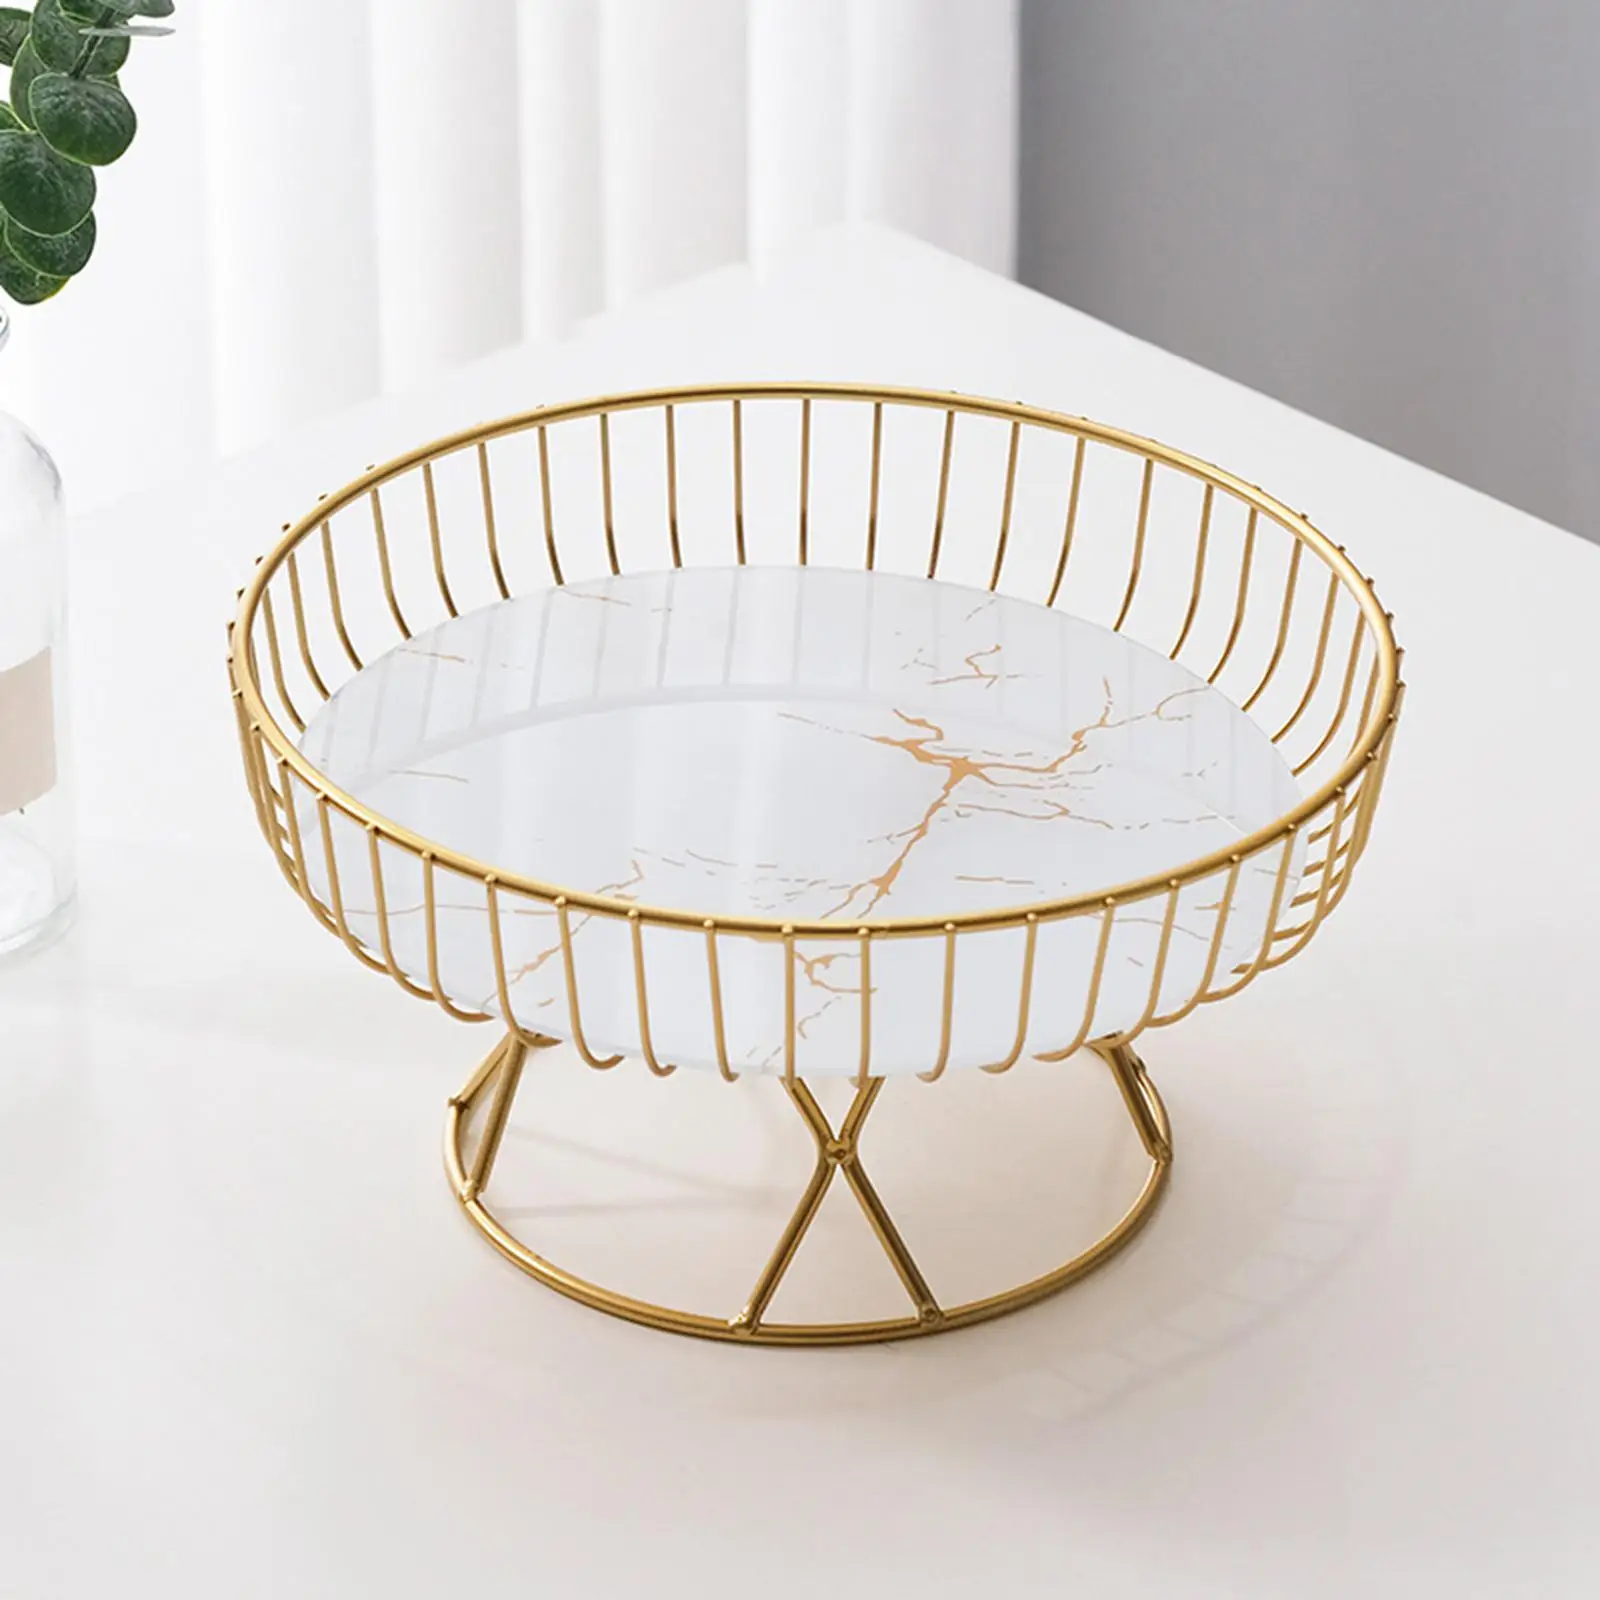 Golden Metal Iron Wire Round Fruit Basket Bowl, Storage, Display, Dry and